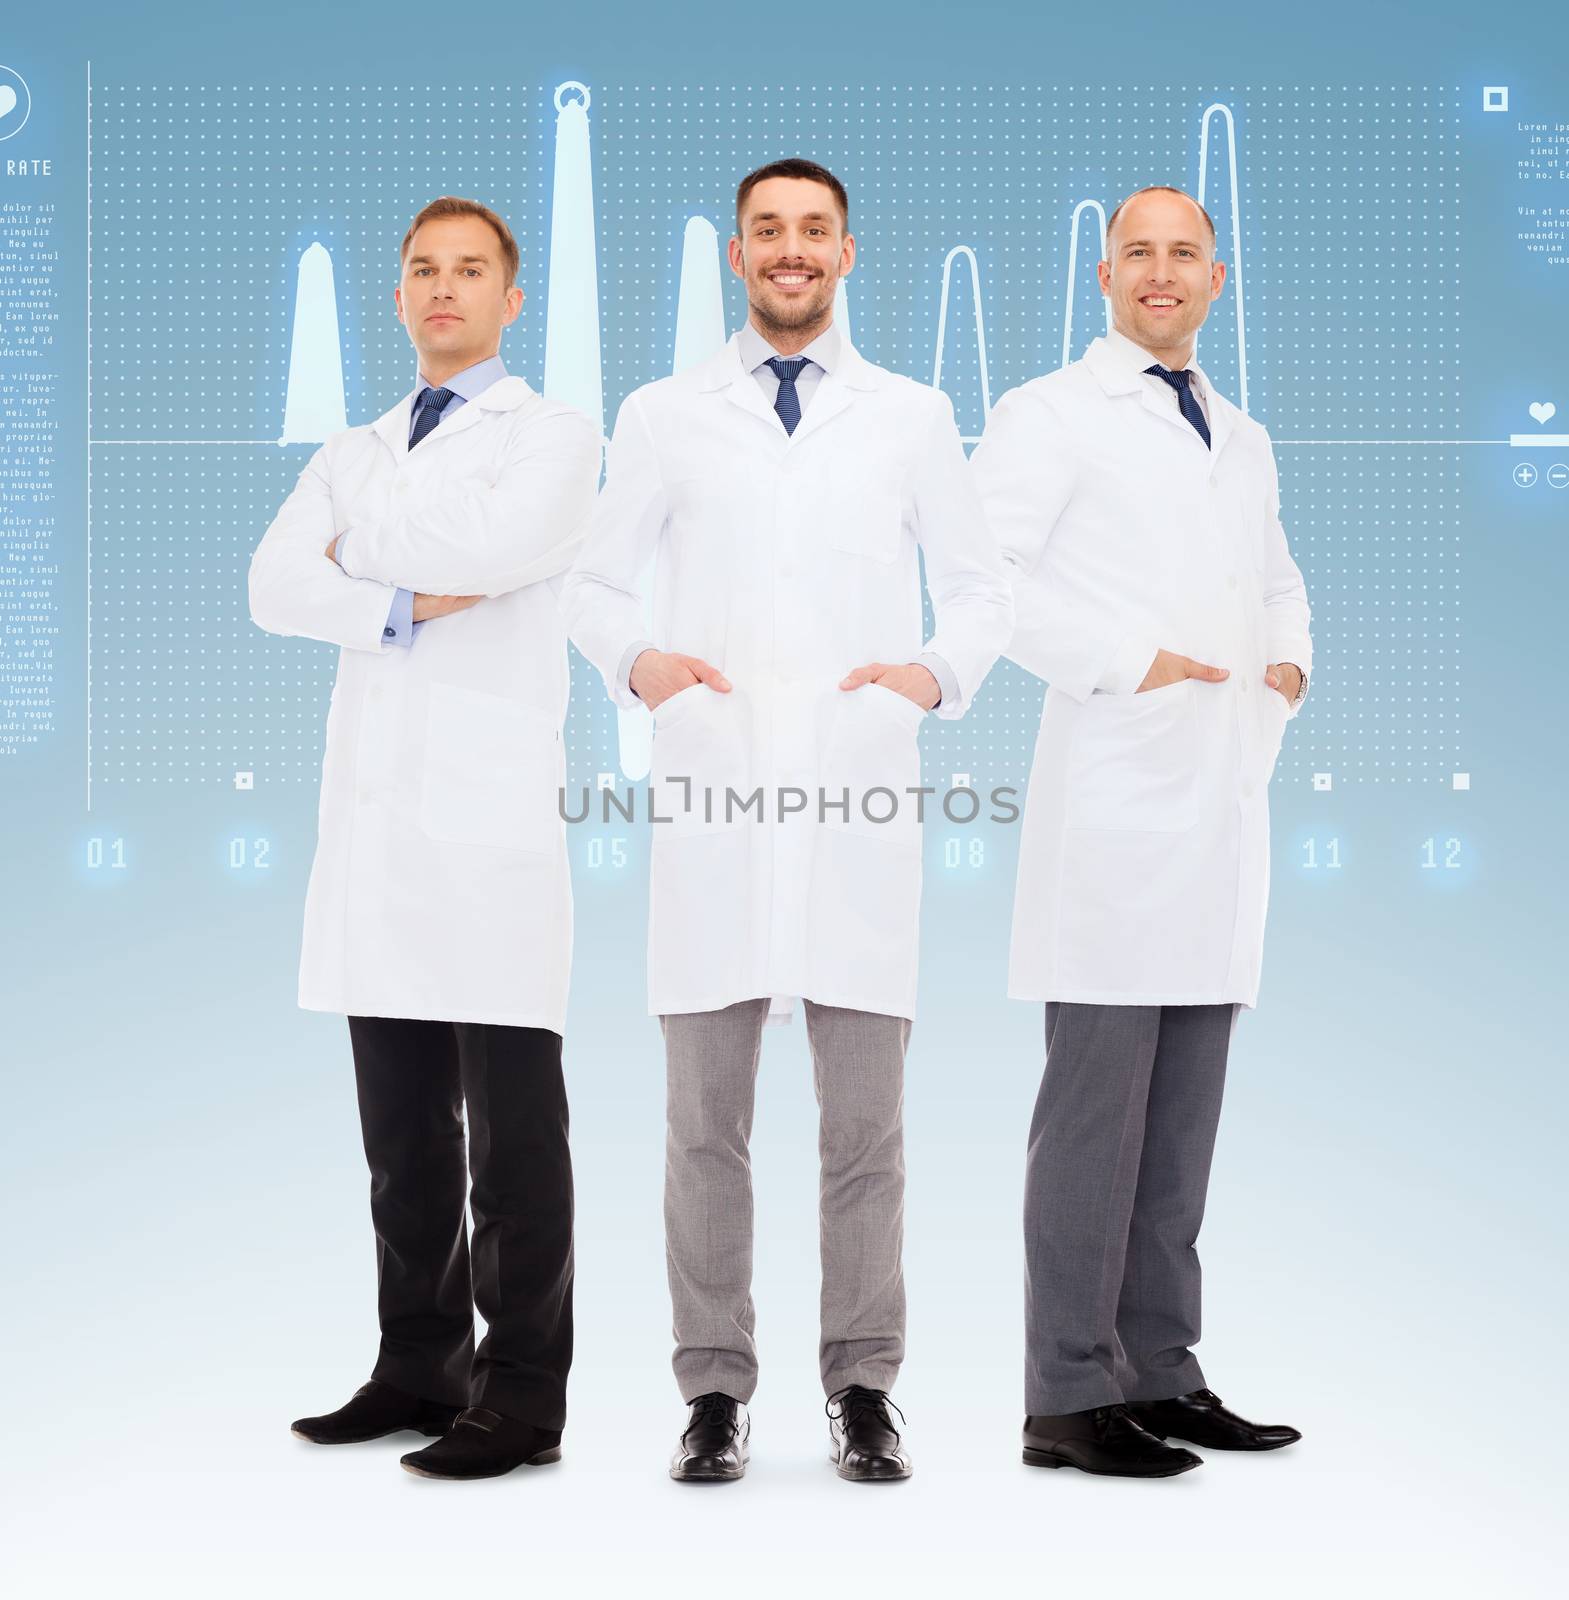 healthcare, profession, teamwork and medicine concept - group of smiling male doctors in white coats over blue background with cardiogram